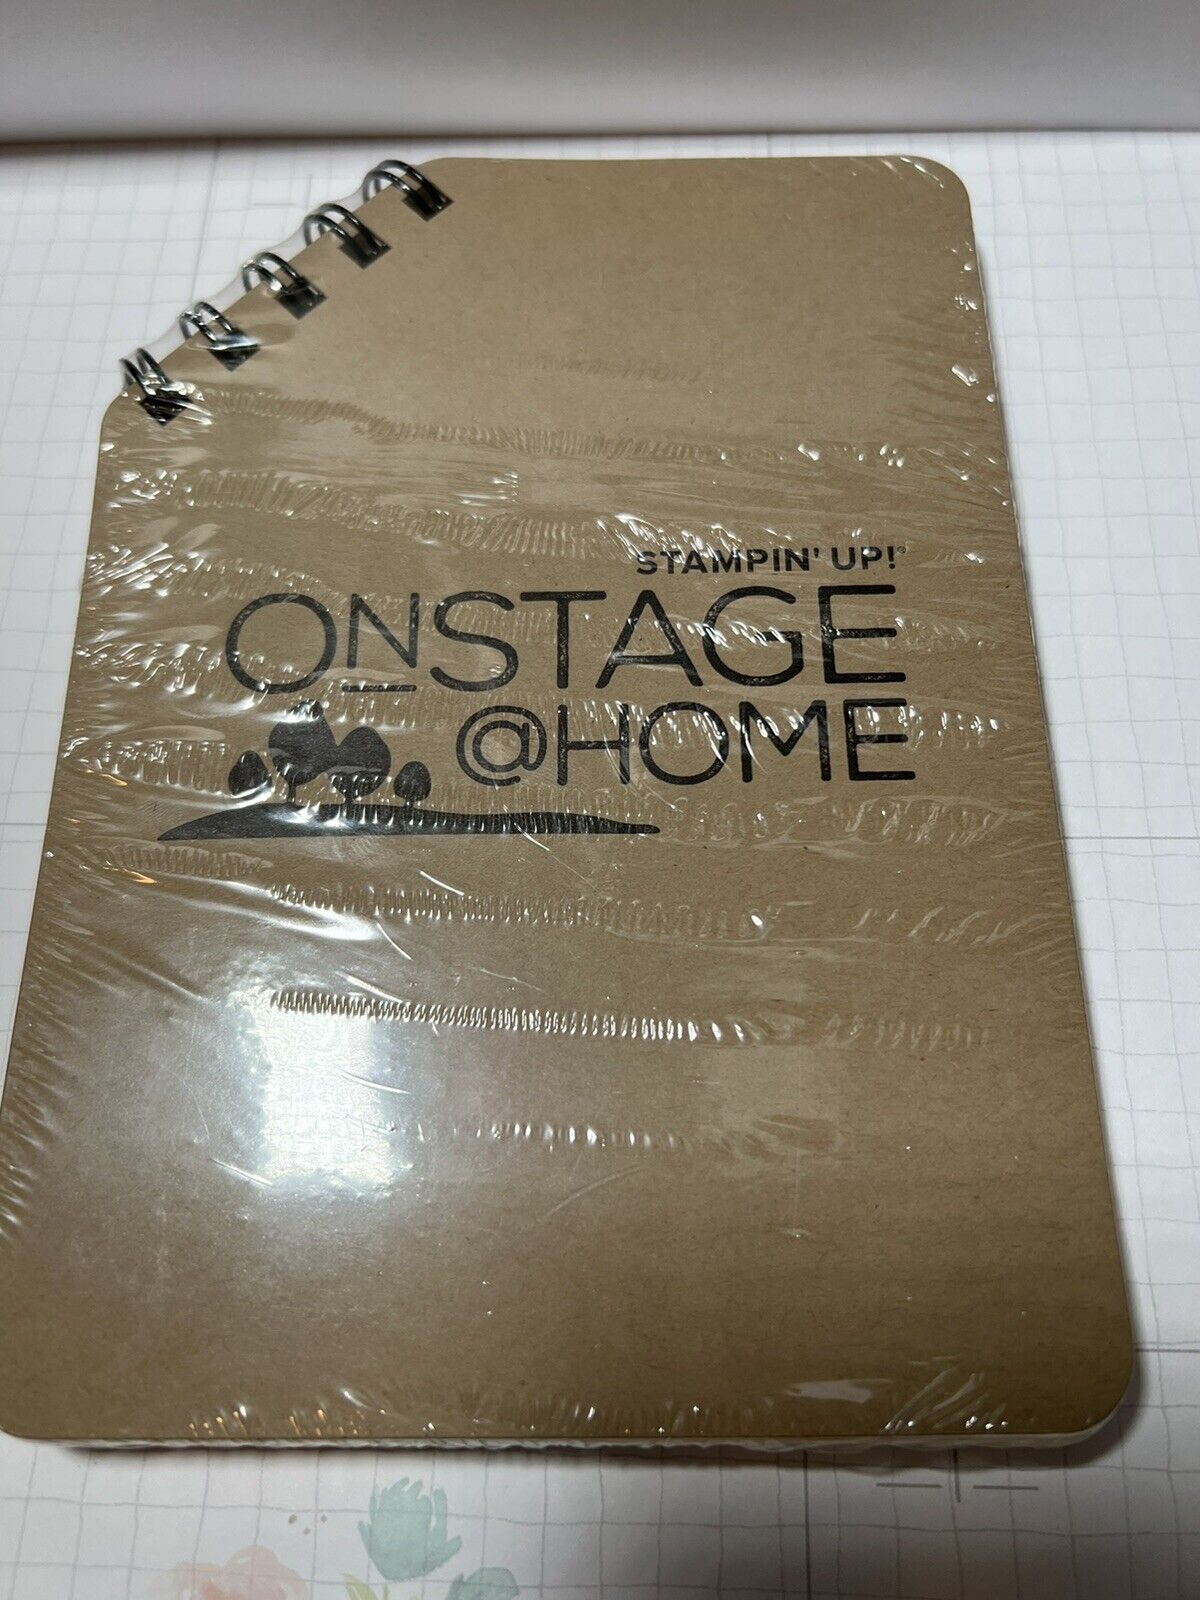 Fees free!! Stampin Up 2021 Low price OnStage At Notebook 5x7 Home NEW